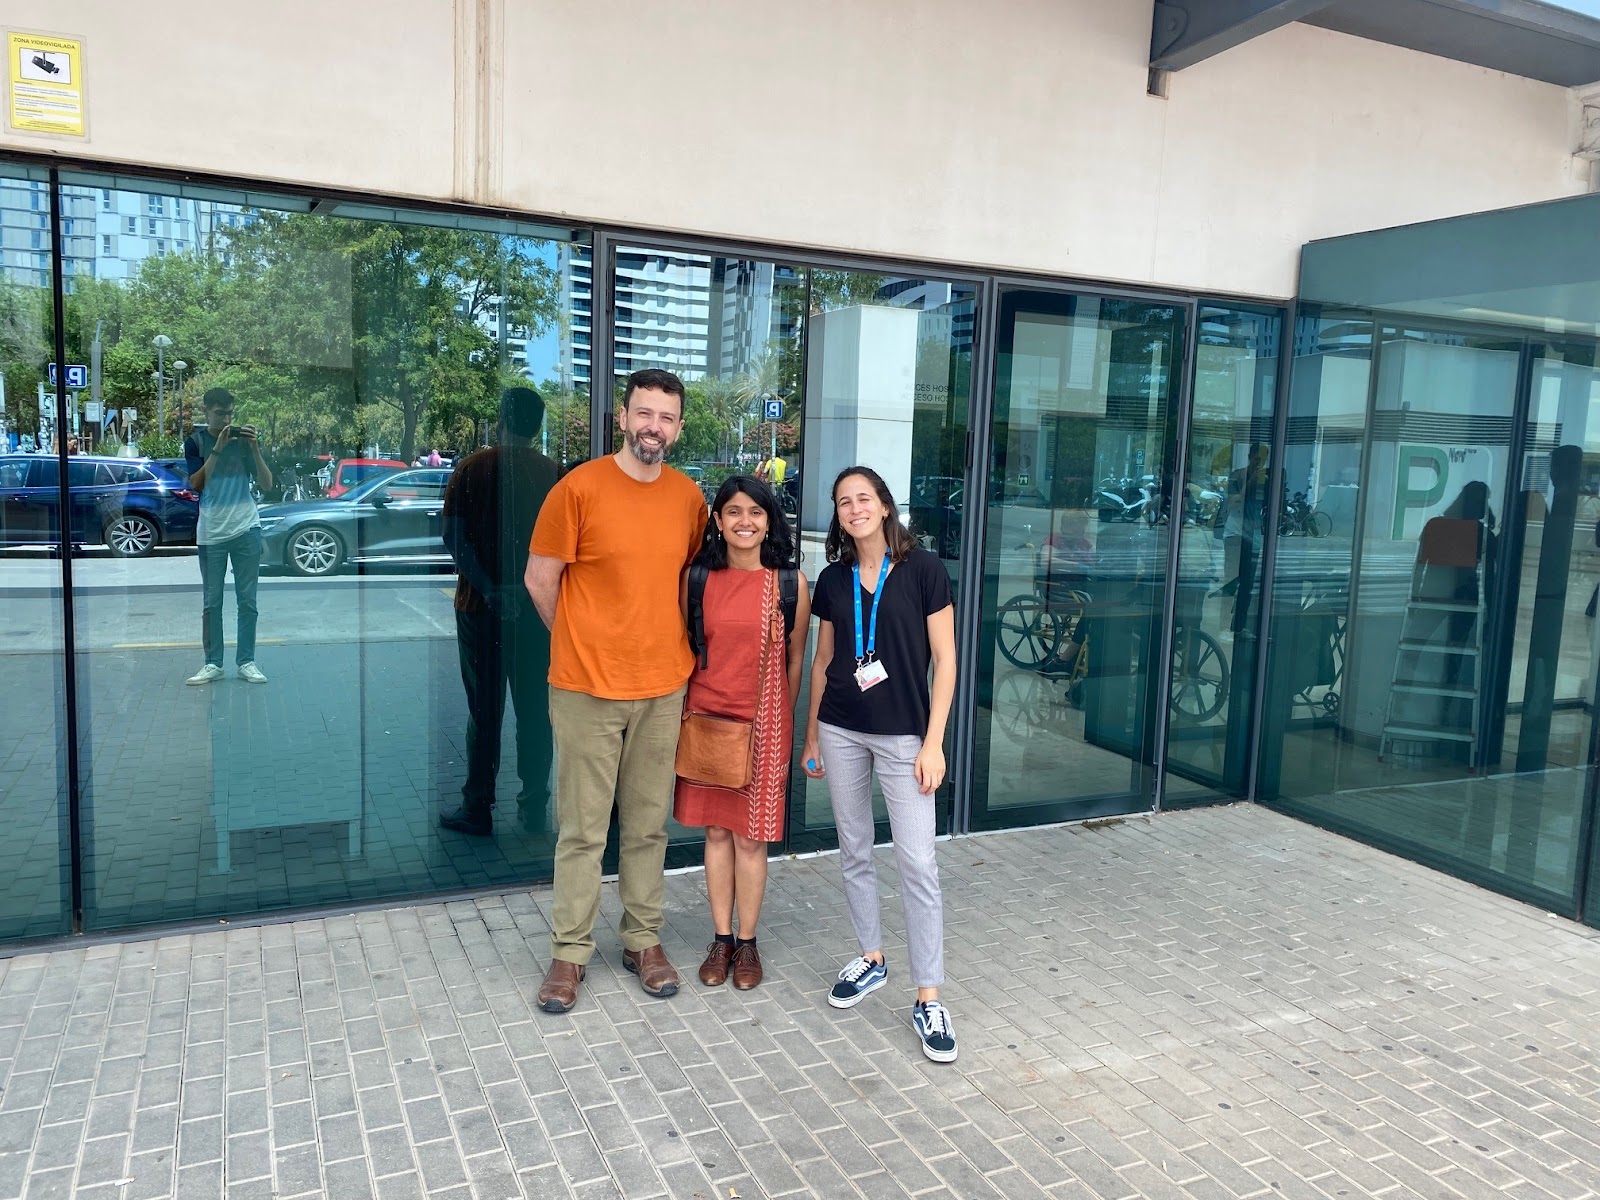 Euro-BioImaging's Head of Image Data Services, Aastha Mathur, with the team at the Hospital La Fe, part of our Population Imaging Node Valencia.